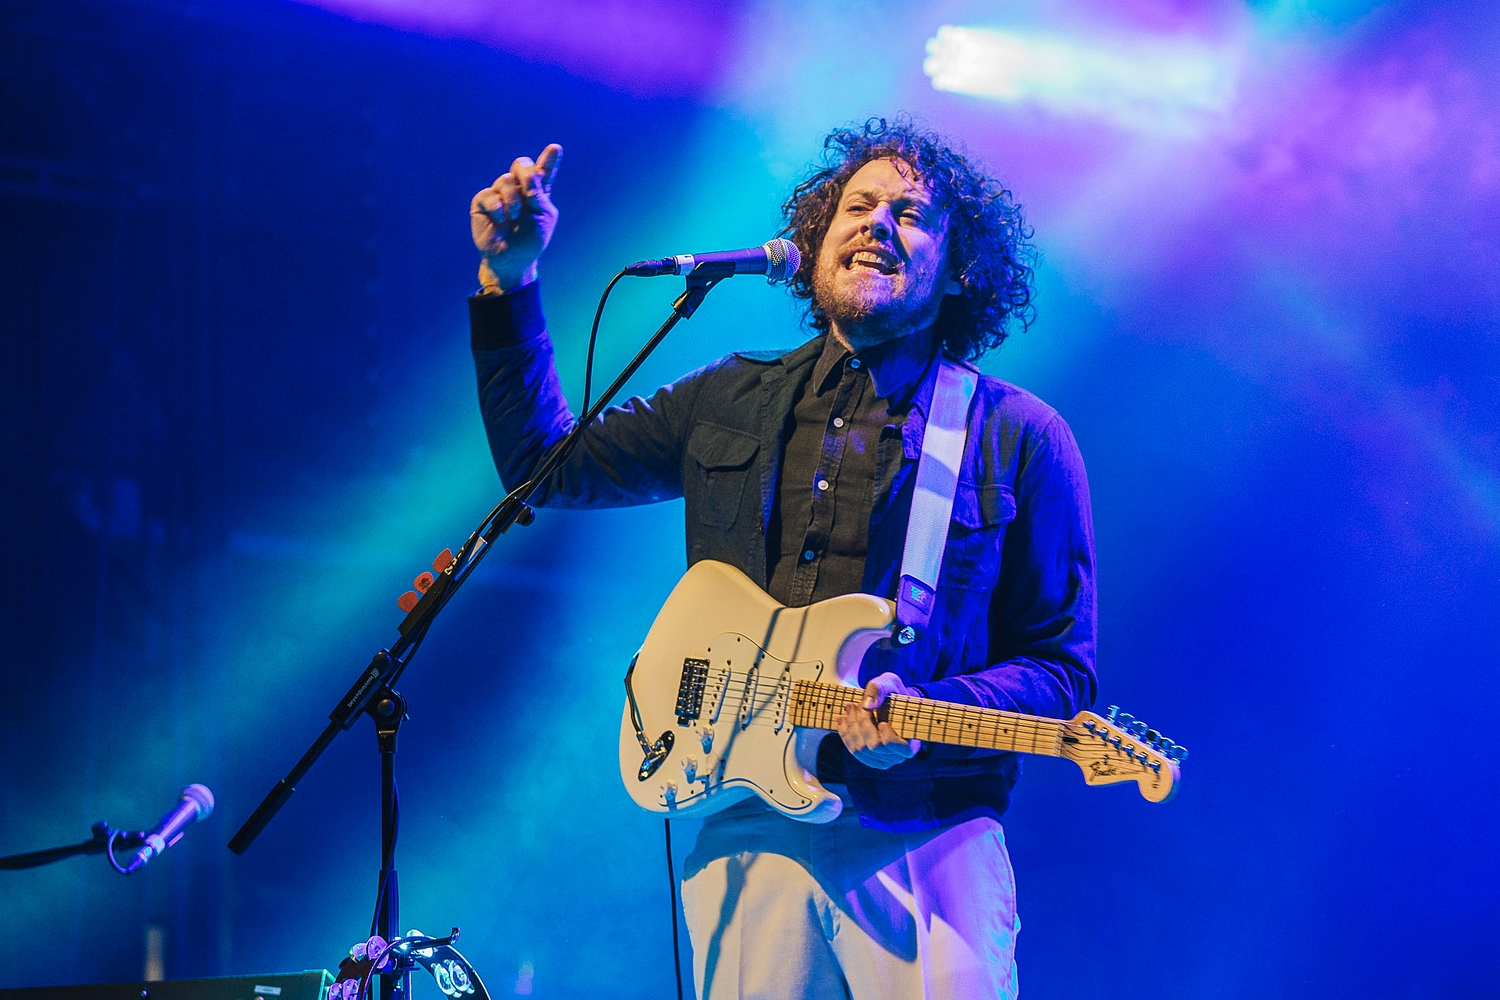 Metronomy, The Kooks and more for Liverpool Sound City